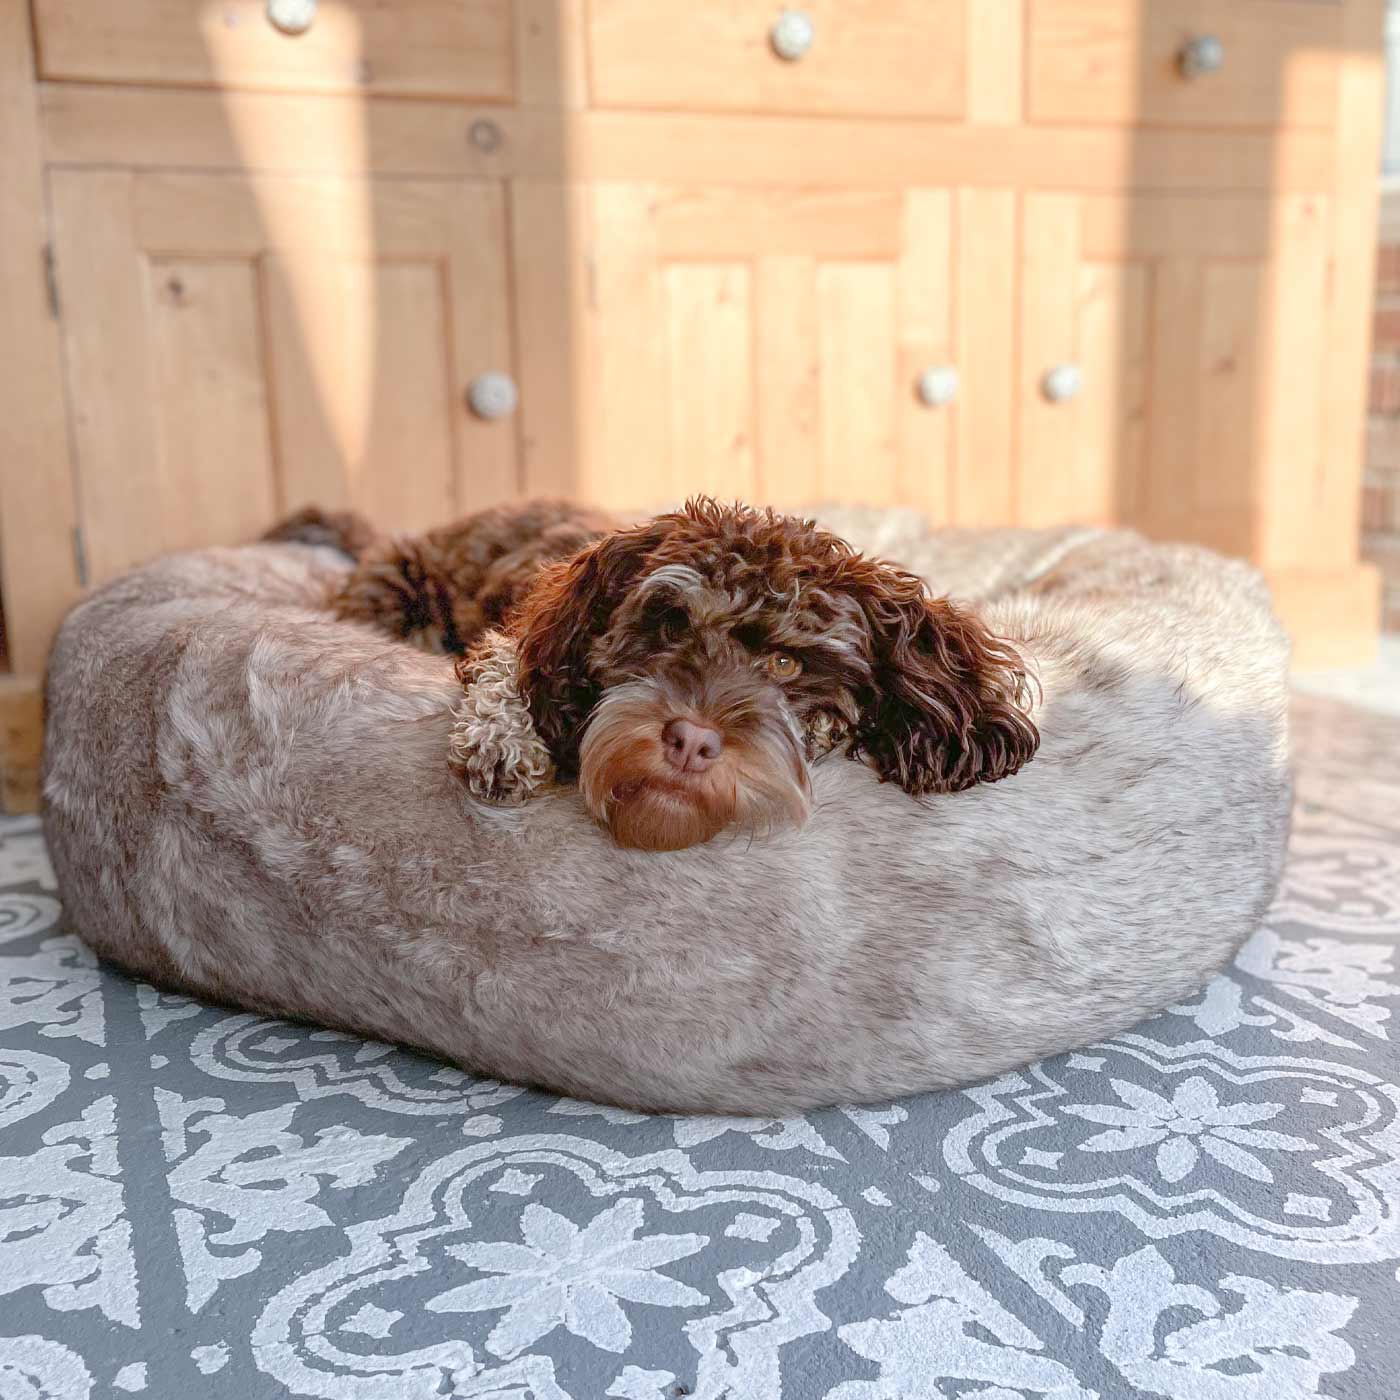 Luxury Anti-Anxiety Dog Bed, In Stunning Siberian Wolf Faux Fur, Perfect For Your Pets Nap Time! Available Now at Lords & Labradors US